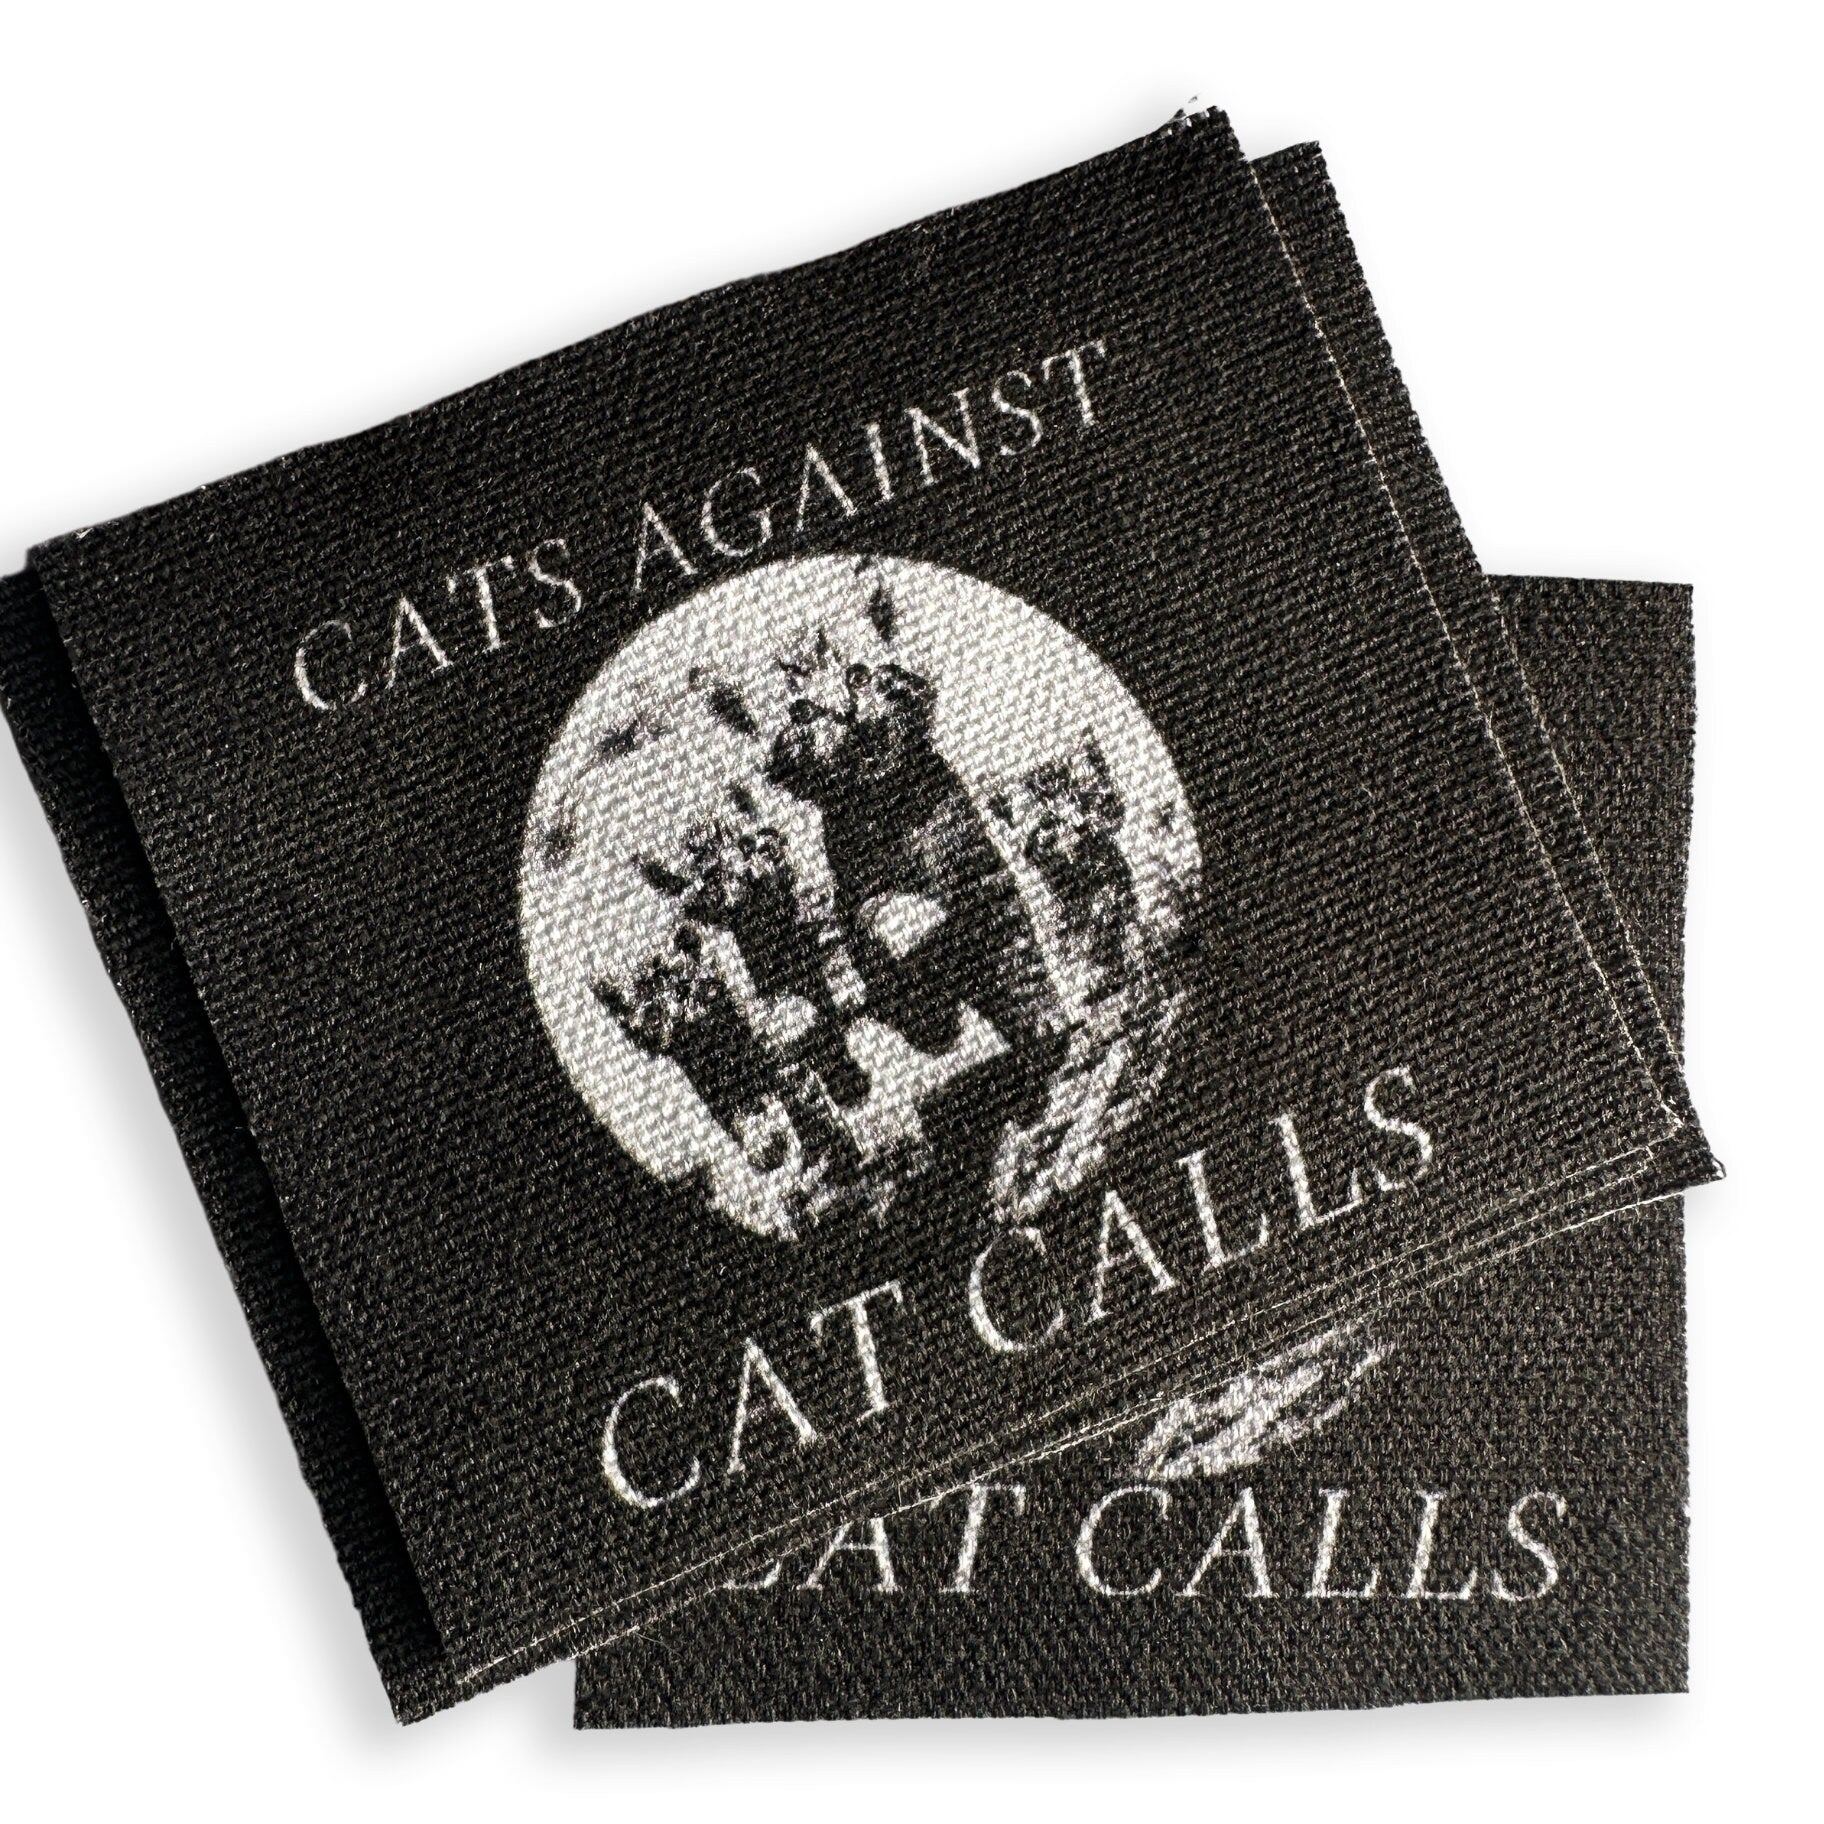 Cat Calls Sewn On Patch | Punk Feminist Accessories DIY Handmade Horror Fabric Patches | Cats Against Cat Calls | 3x3"